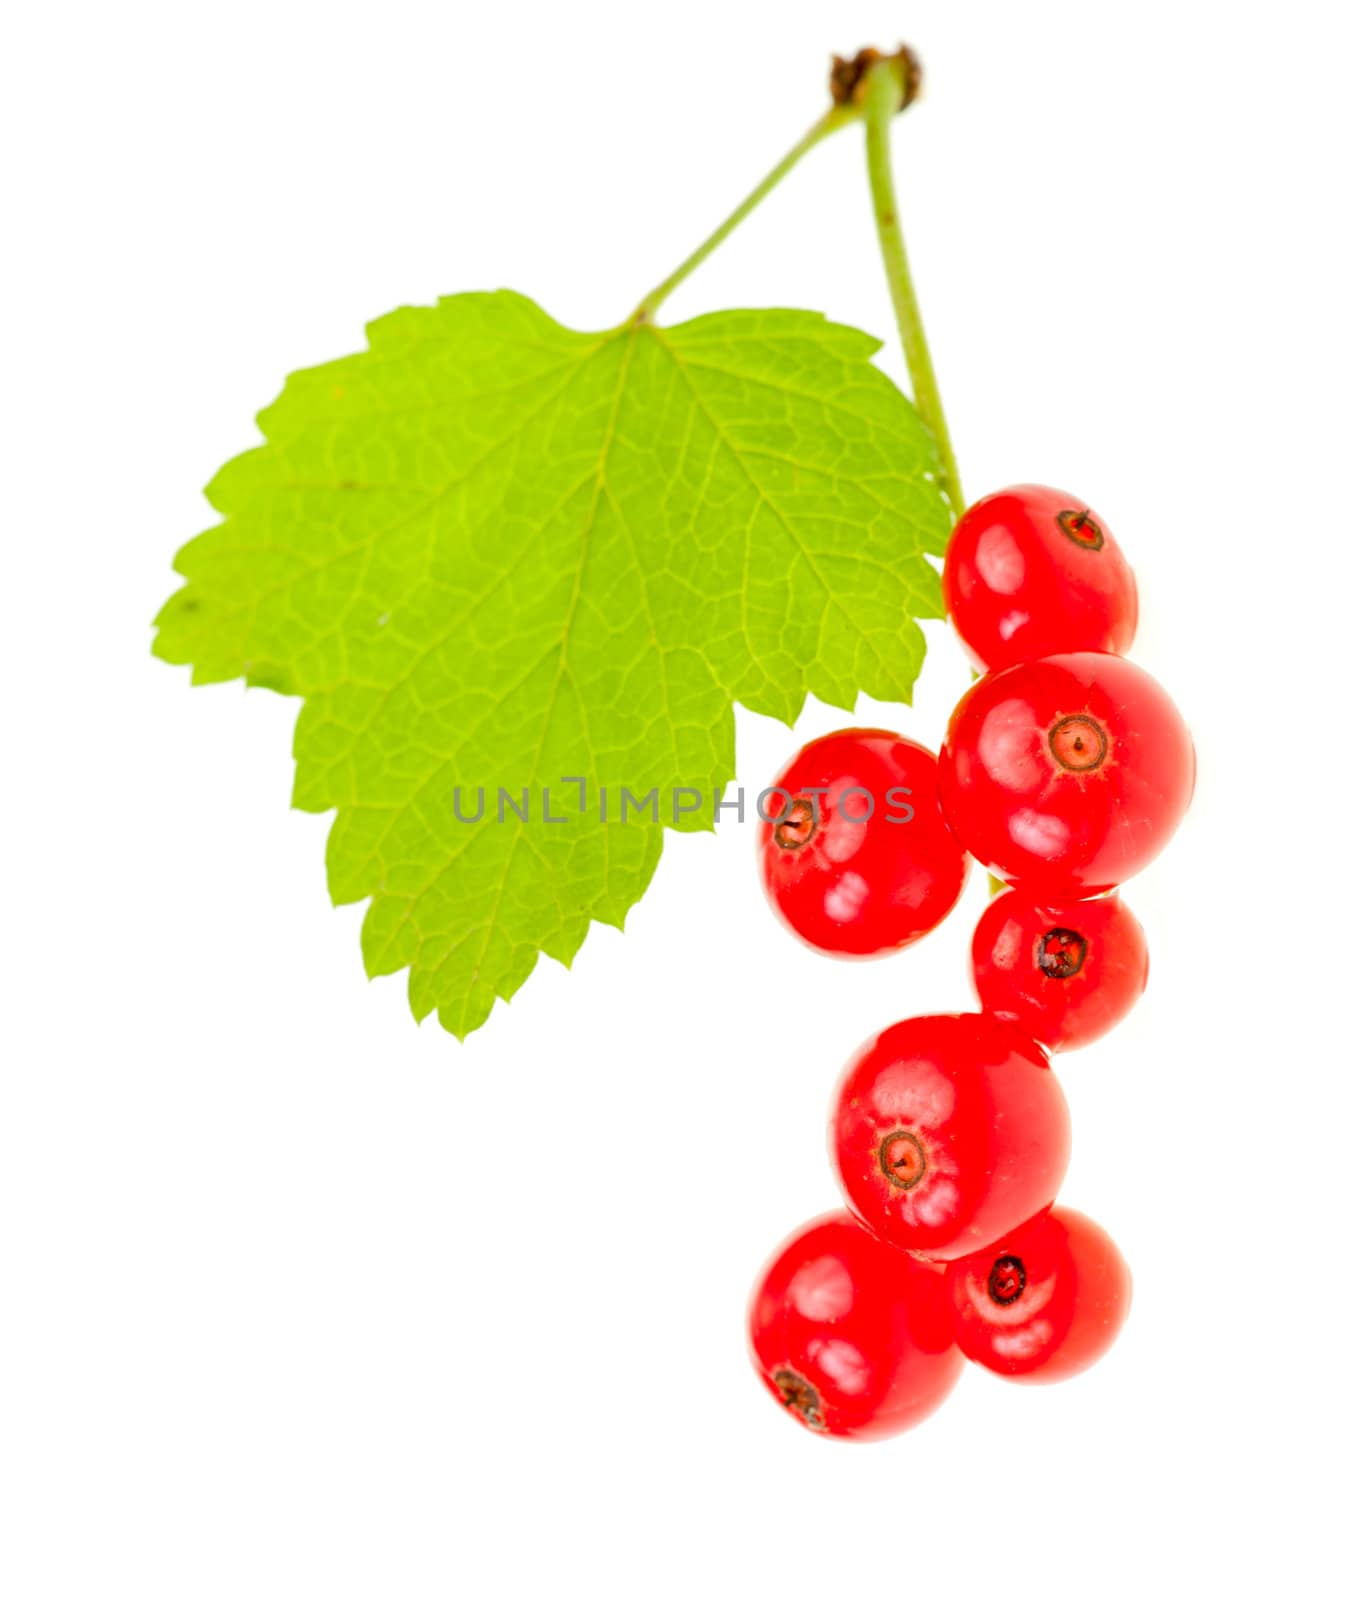 Redcurrant berries with leaf on white background